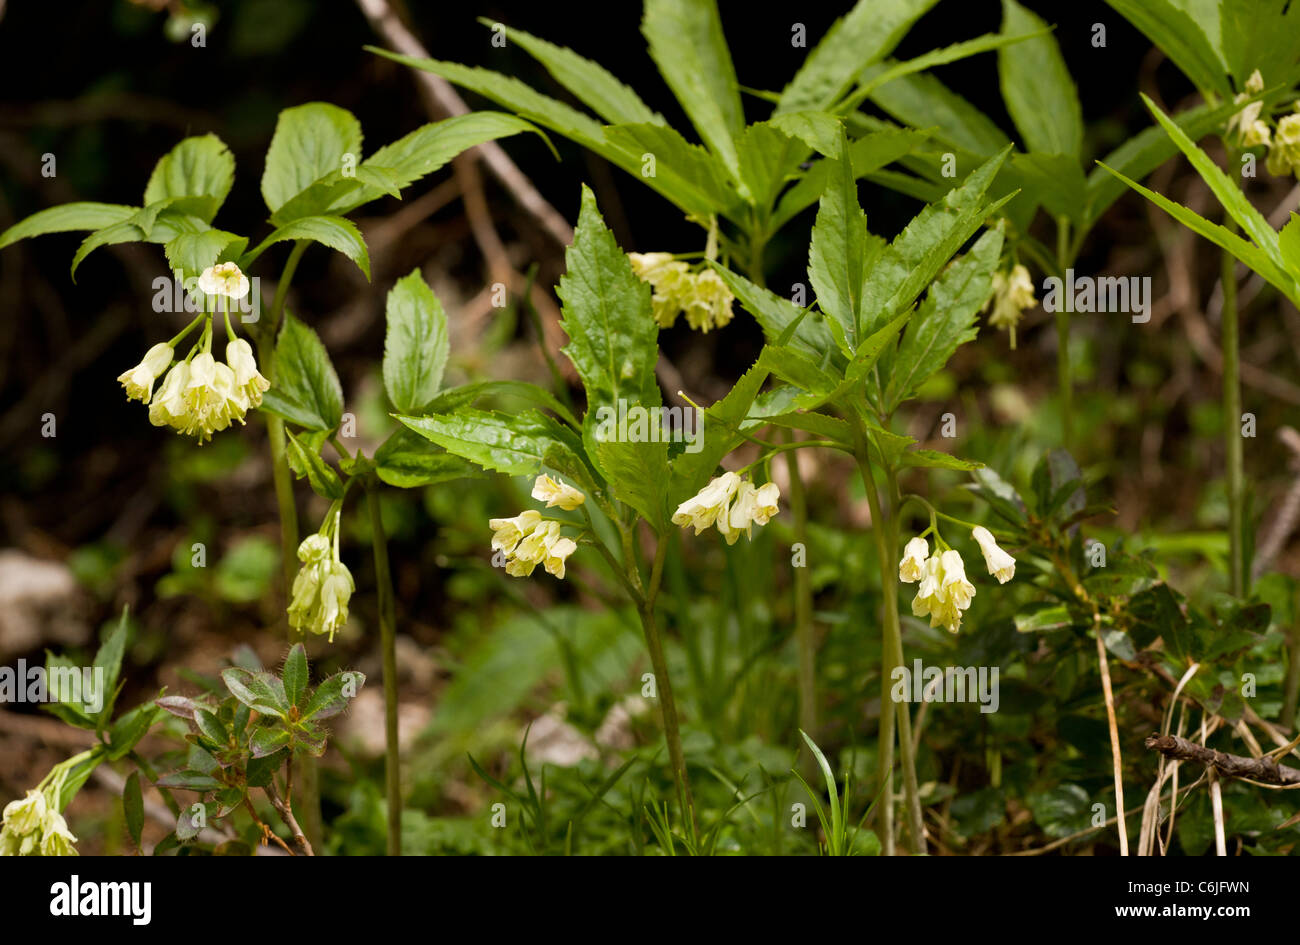 Drooping Bitter-cress, Cardamine enneaphyllos in flower; Slovenia. Stock Photo